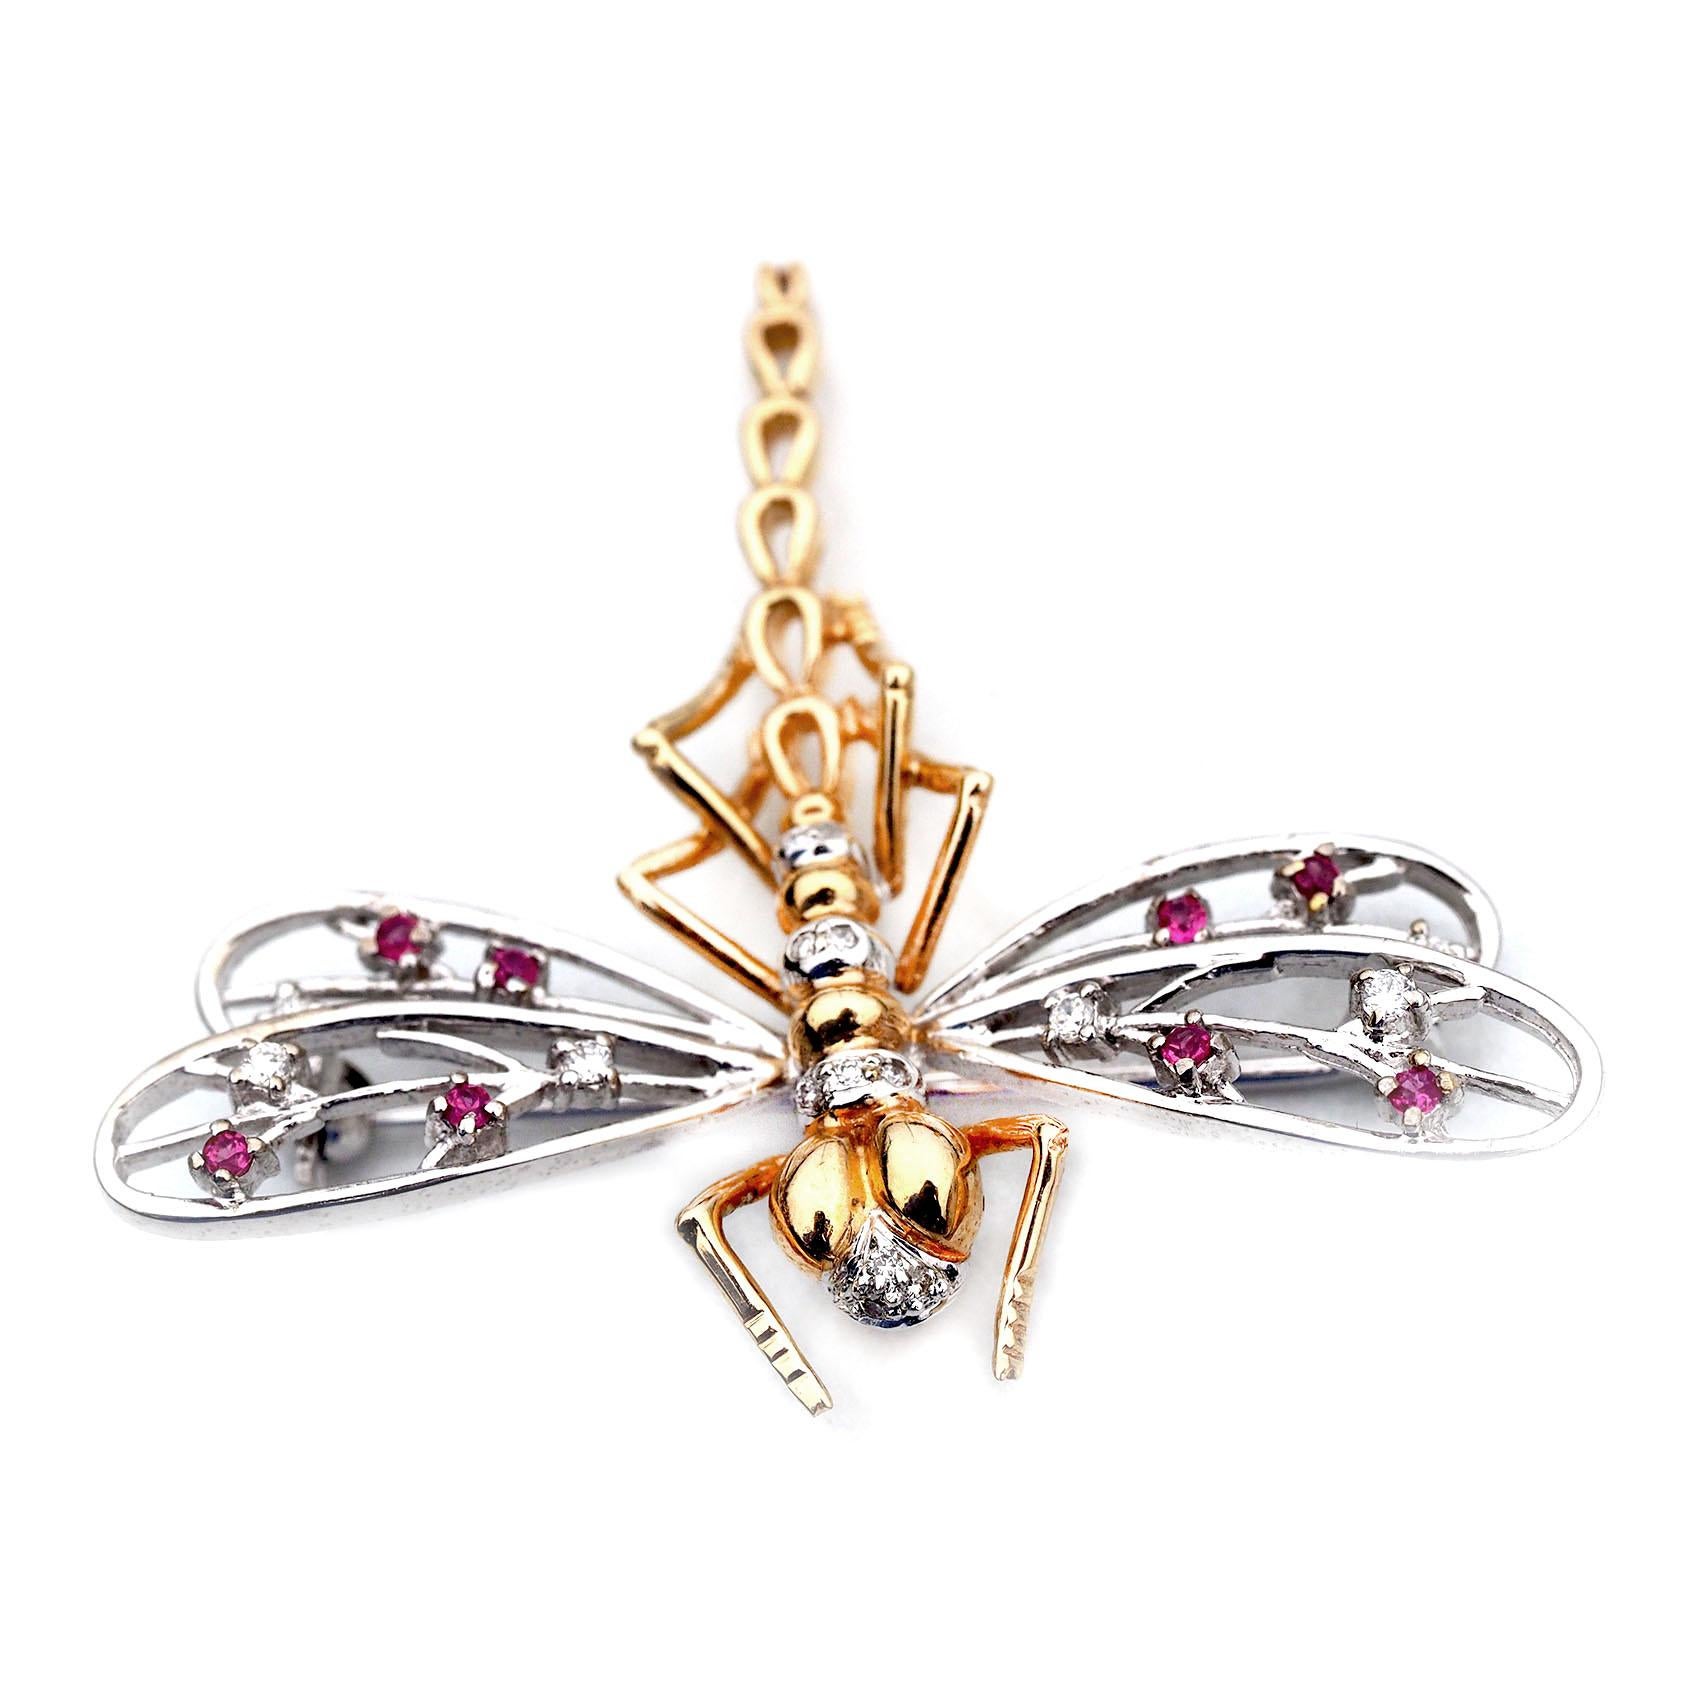 14 Karat Yellow and White Gold Dragonfly Pin with Rubies and Diamonds 2